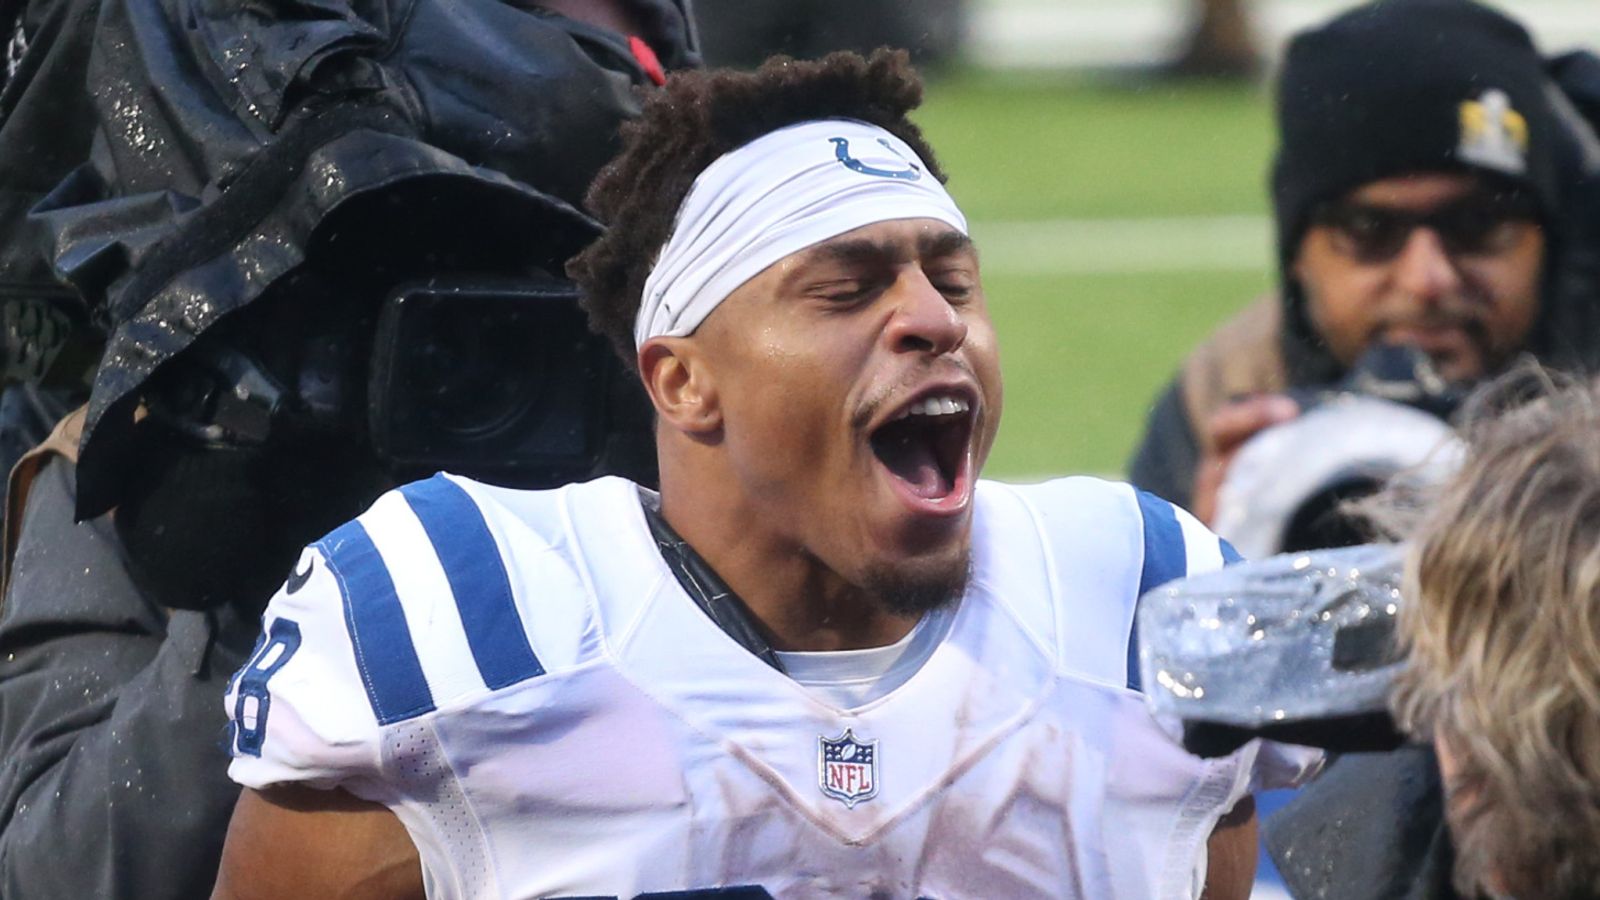 Taylor runs up the score with 5 TDs; Colts beat Bills 41-15